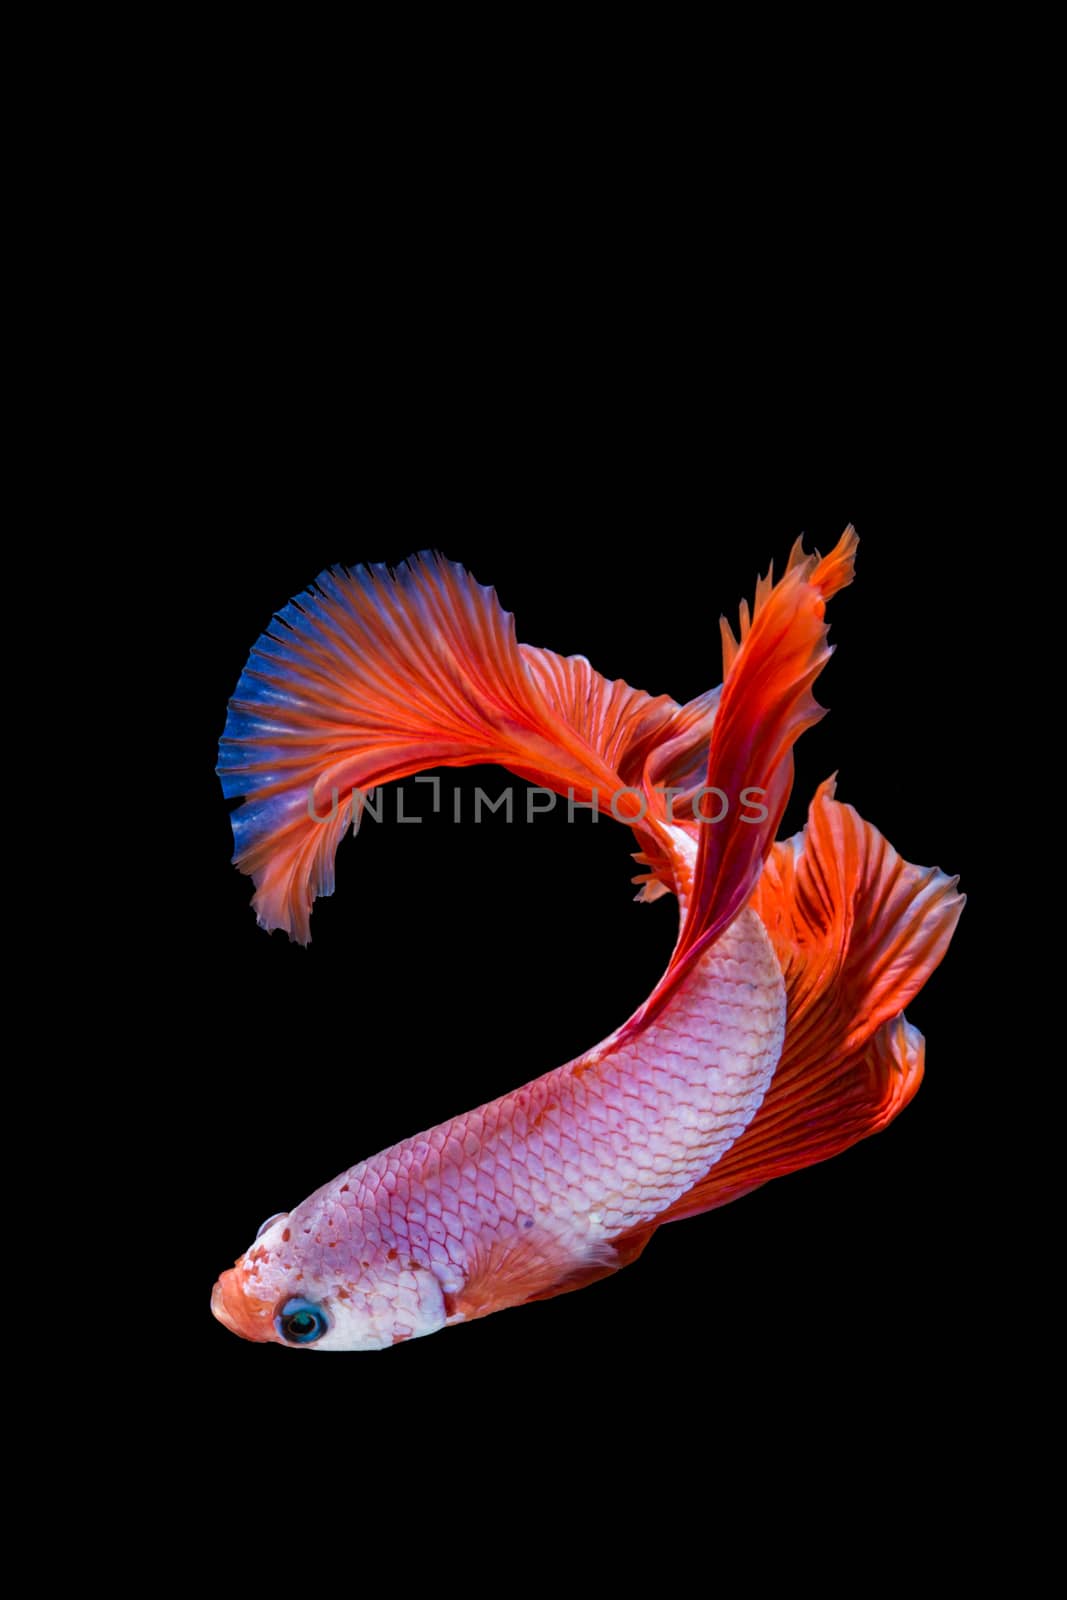 Pink and red betta fish, siamese fighting fish on black backgrou by yuiyuize